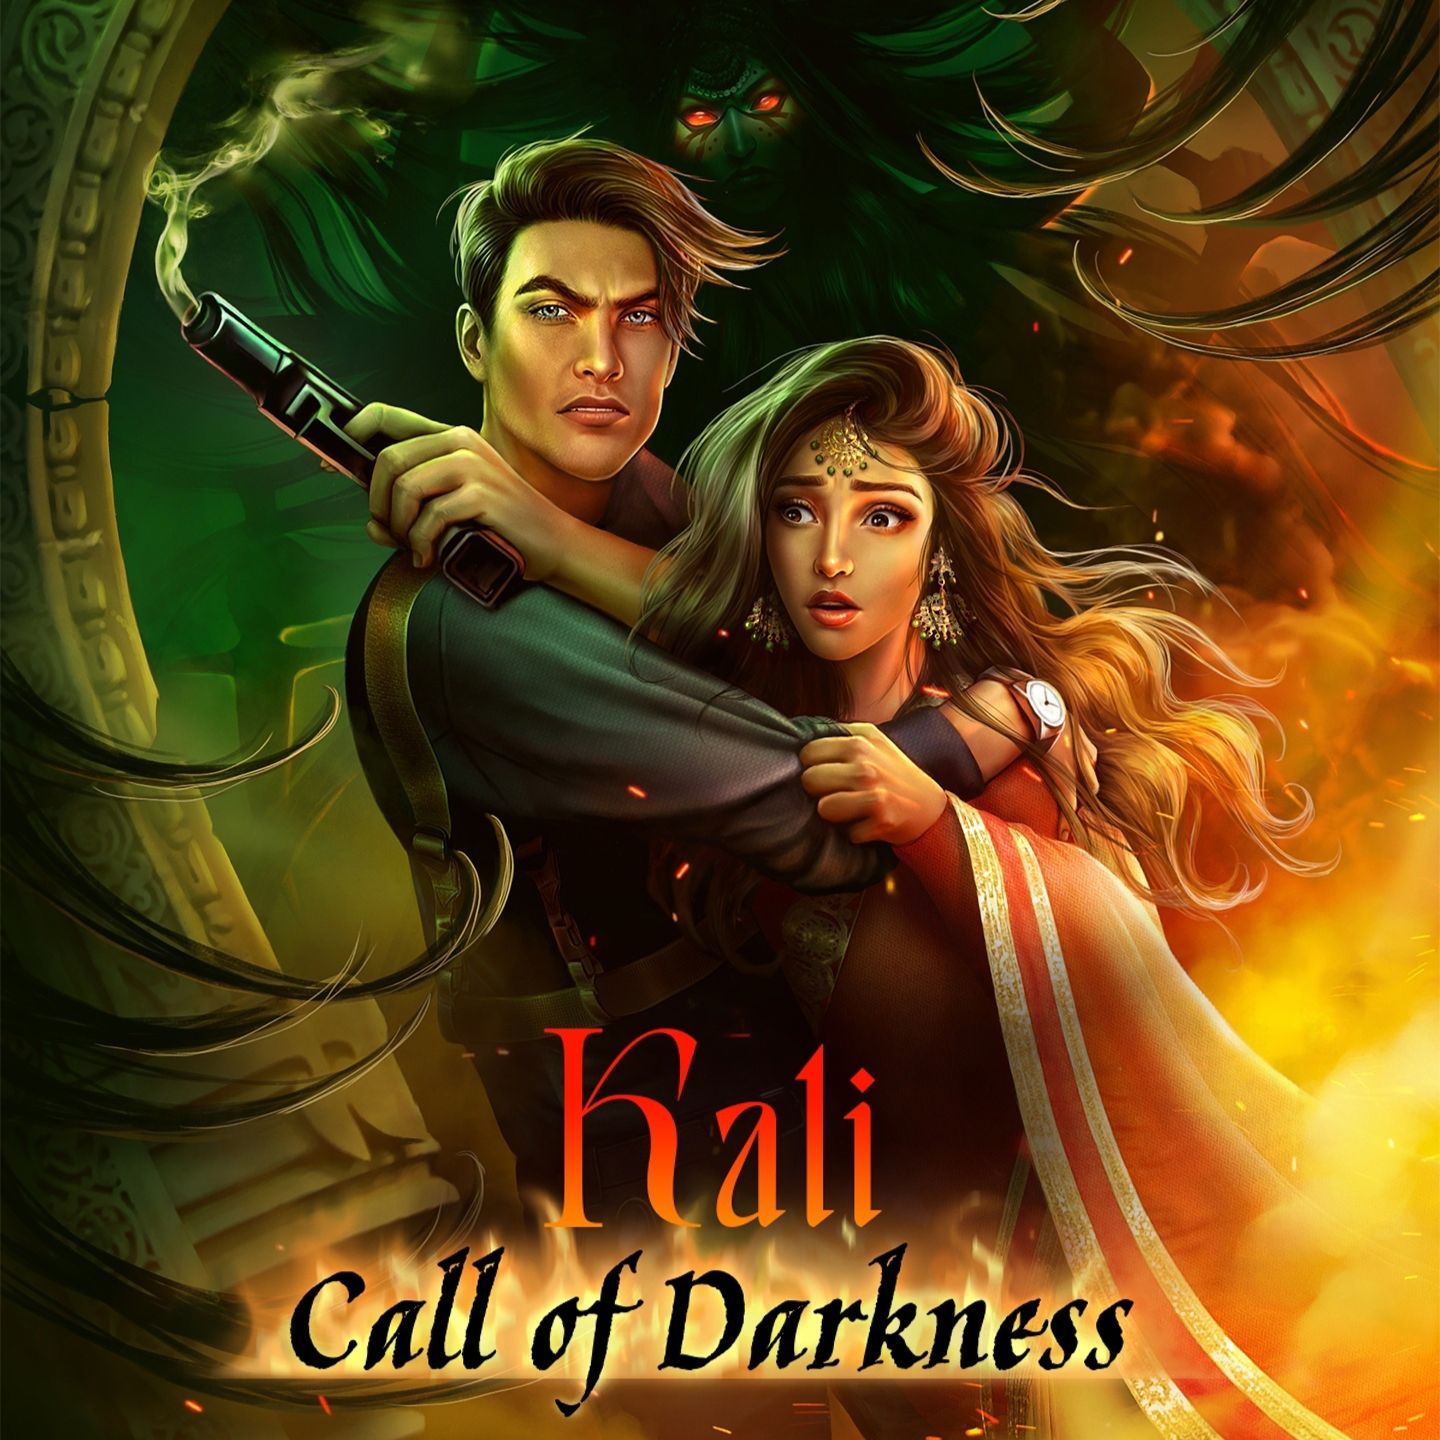 Aflaai Your Story Interactive - Kali - Amrit